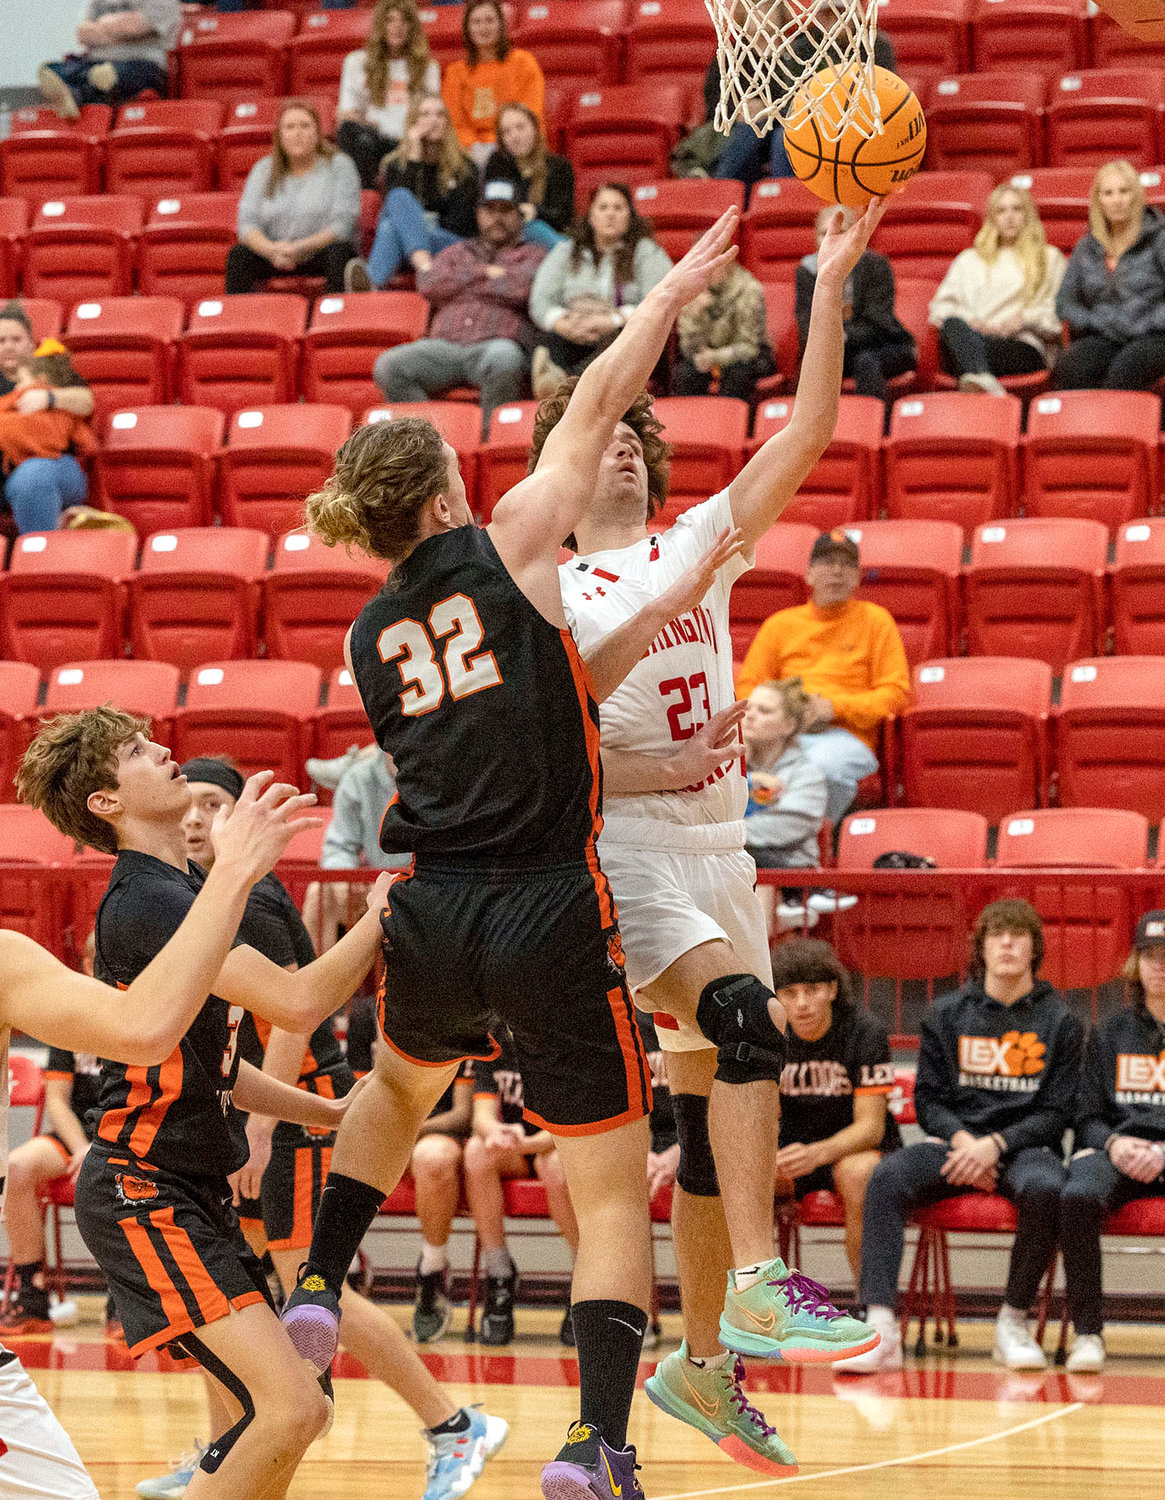 Washington senior Cash Andrews scores two of his game-high 23 points during the Warriors’ 87-31 win over Lexington. Washington plays again Jan. 3 against Pauls Valley at home.